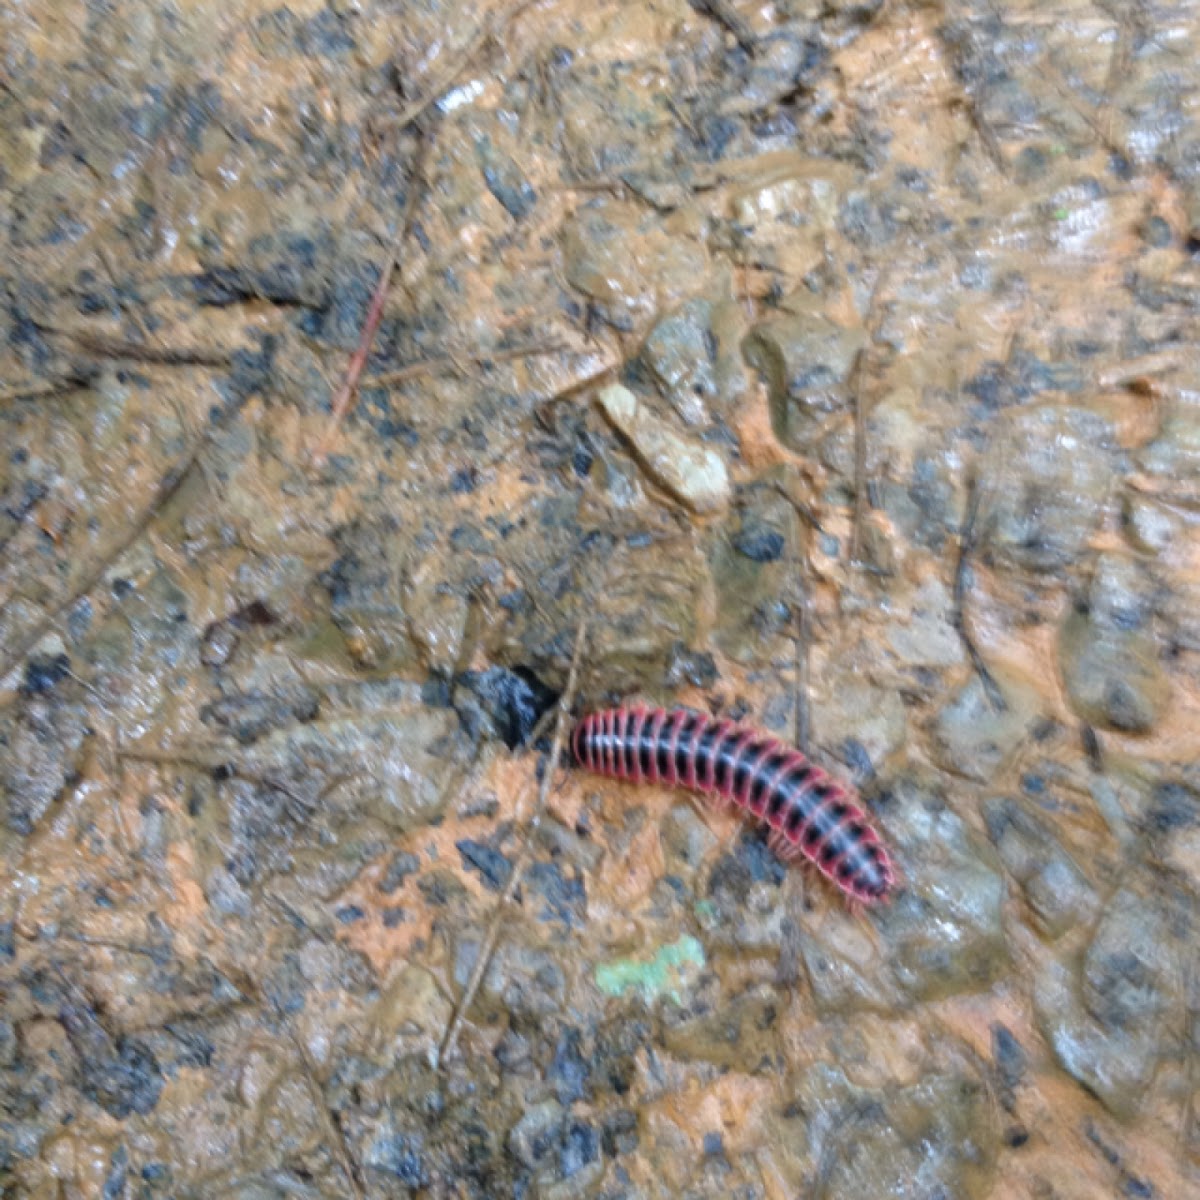 Red Sided Flat Millipede